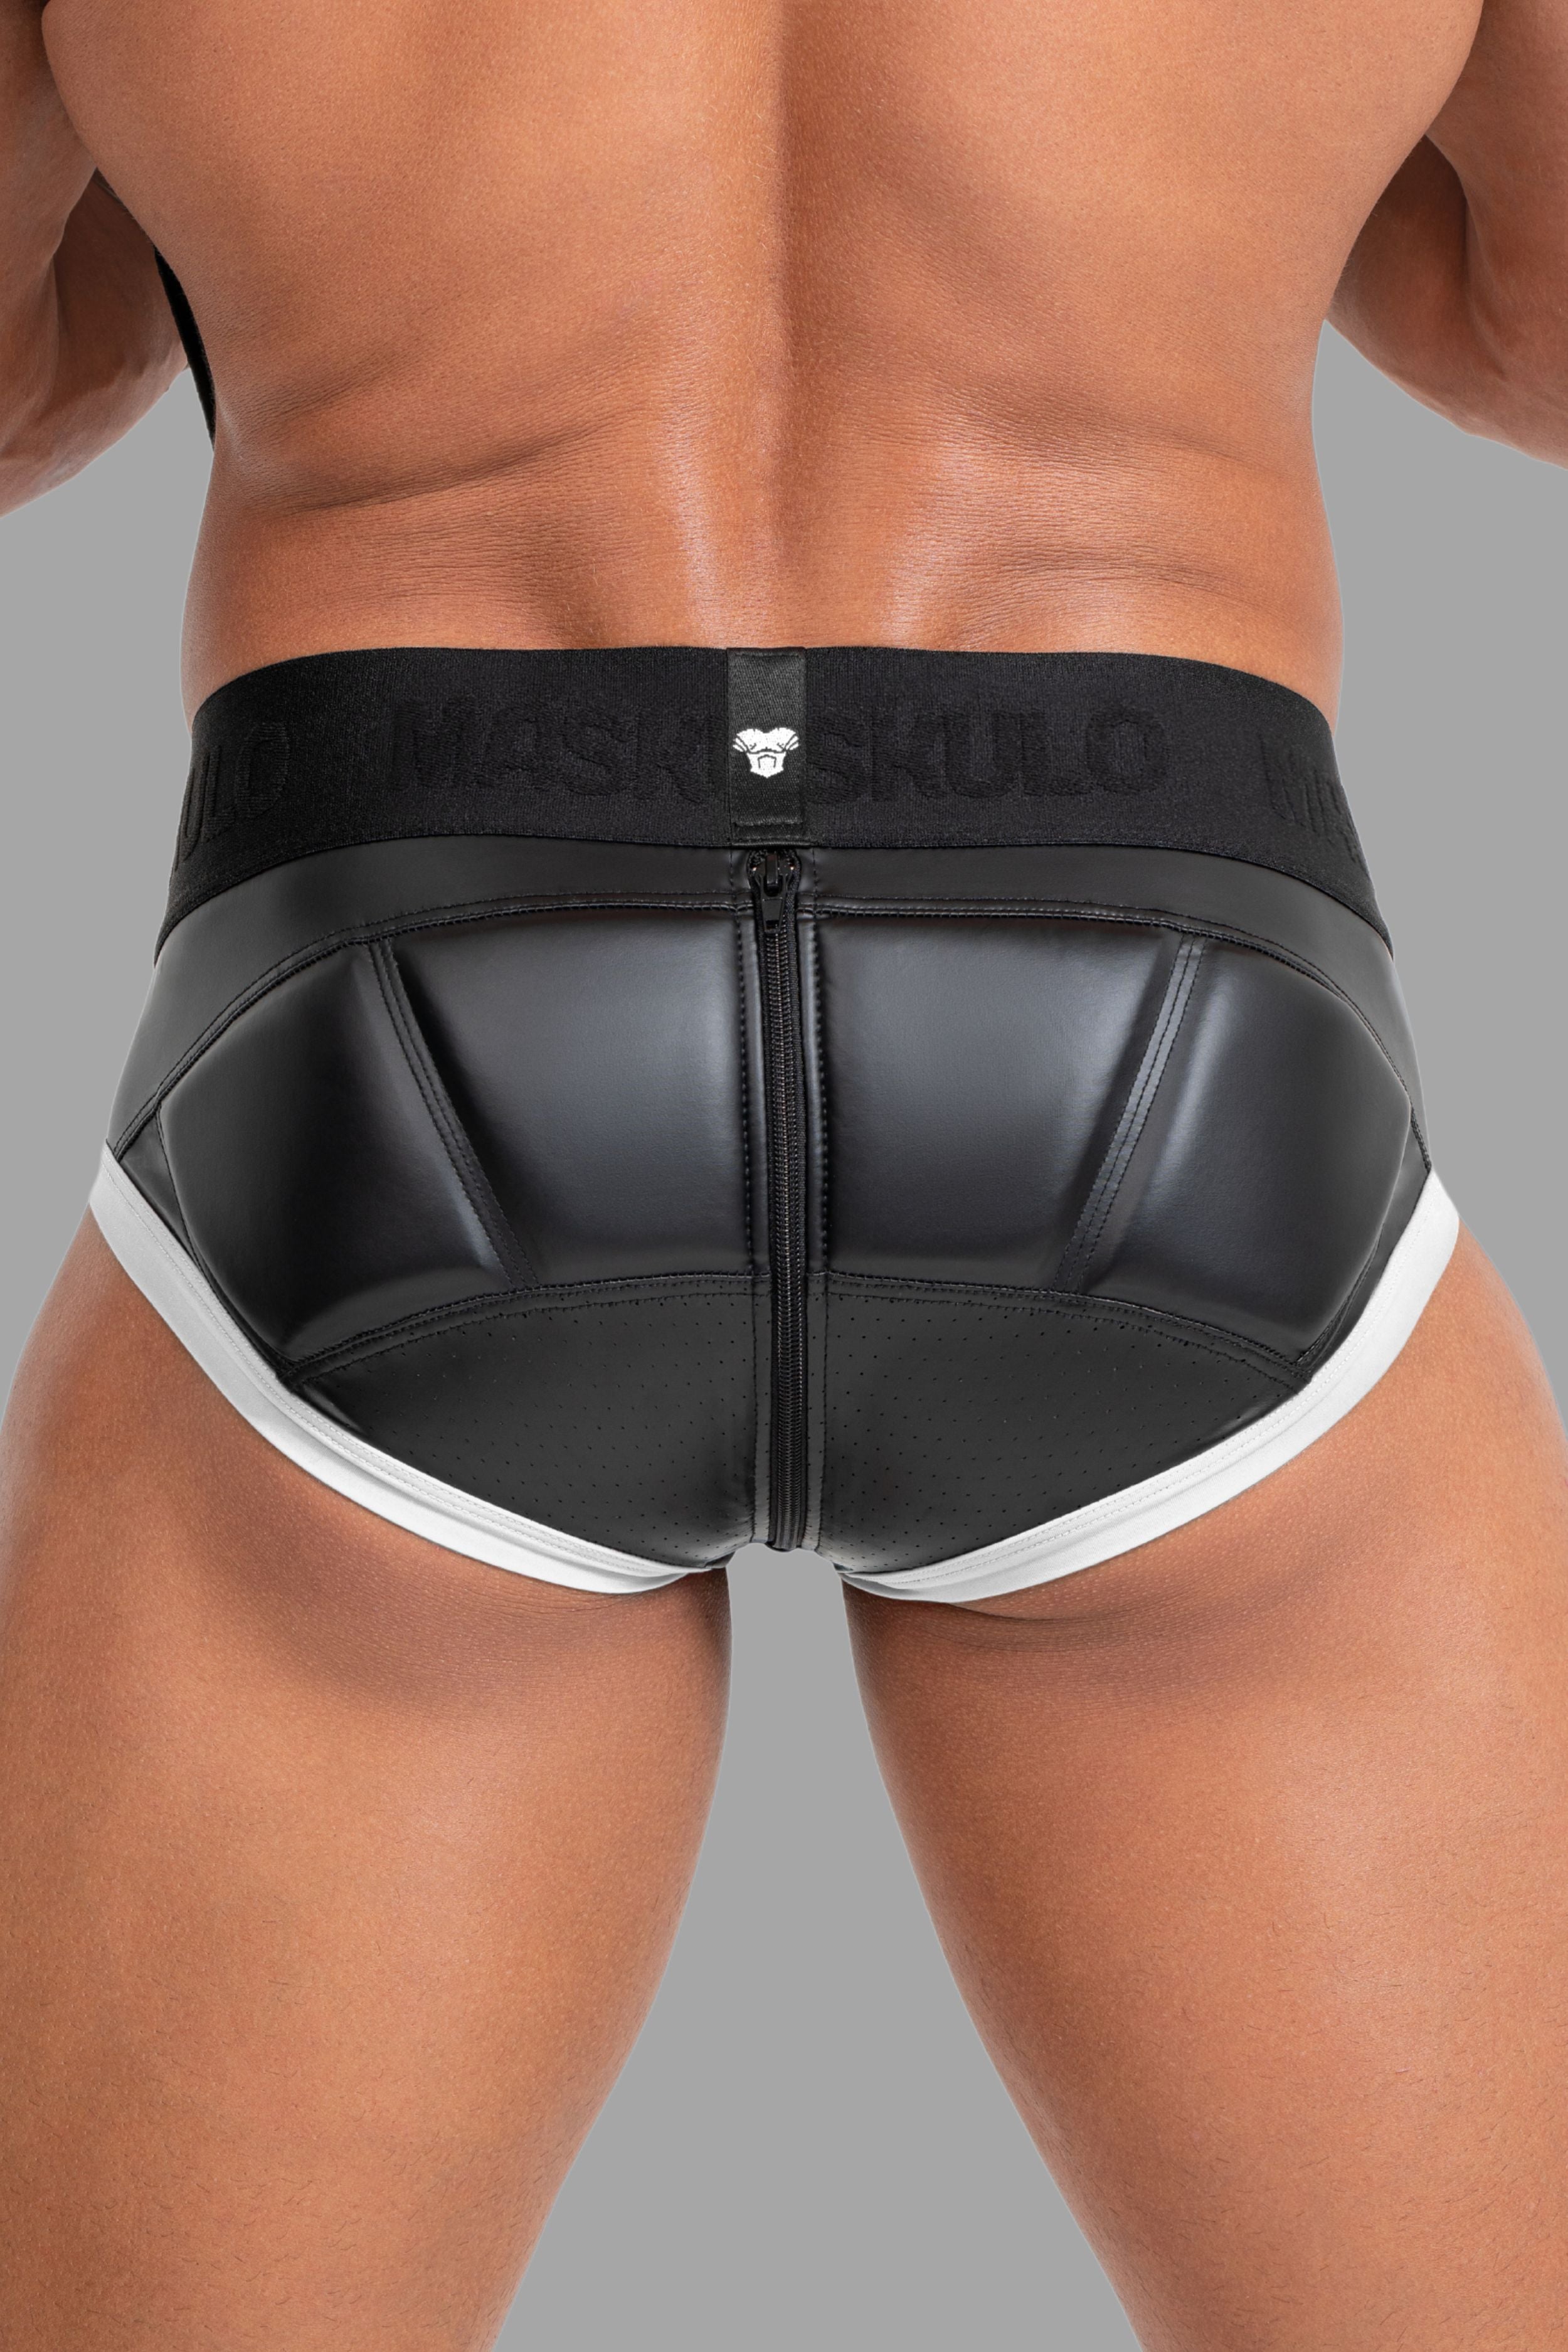 Briefs with Pads. Black+White